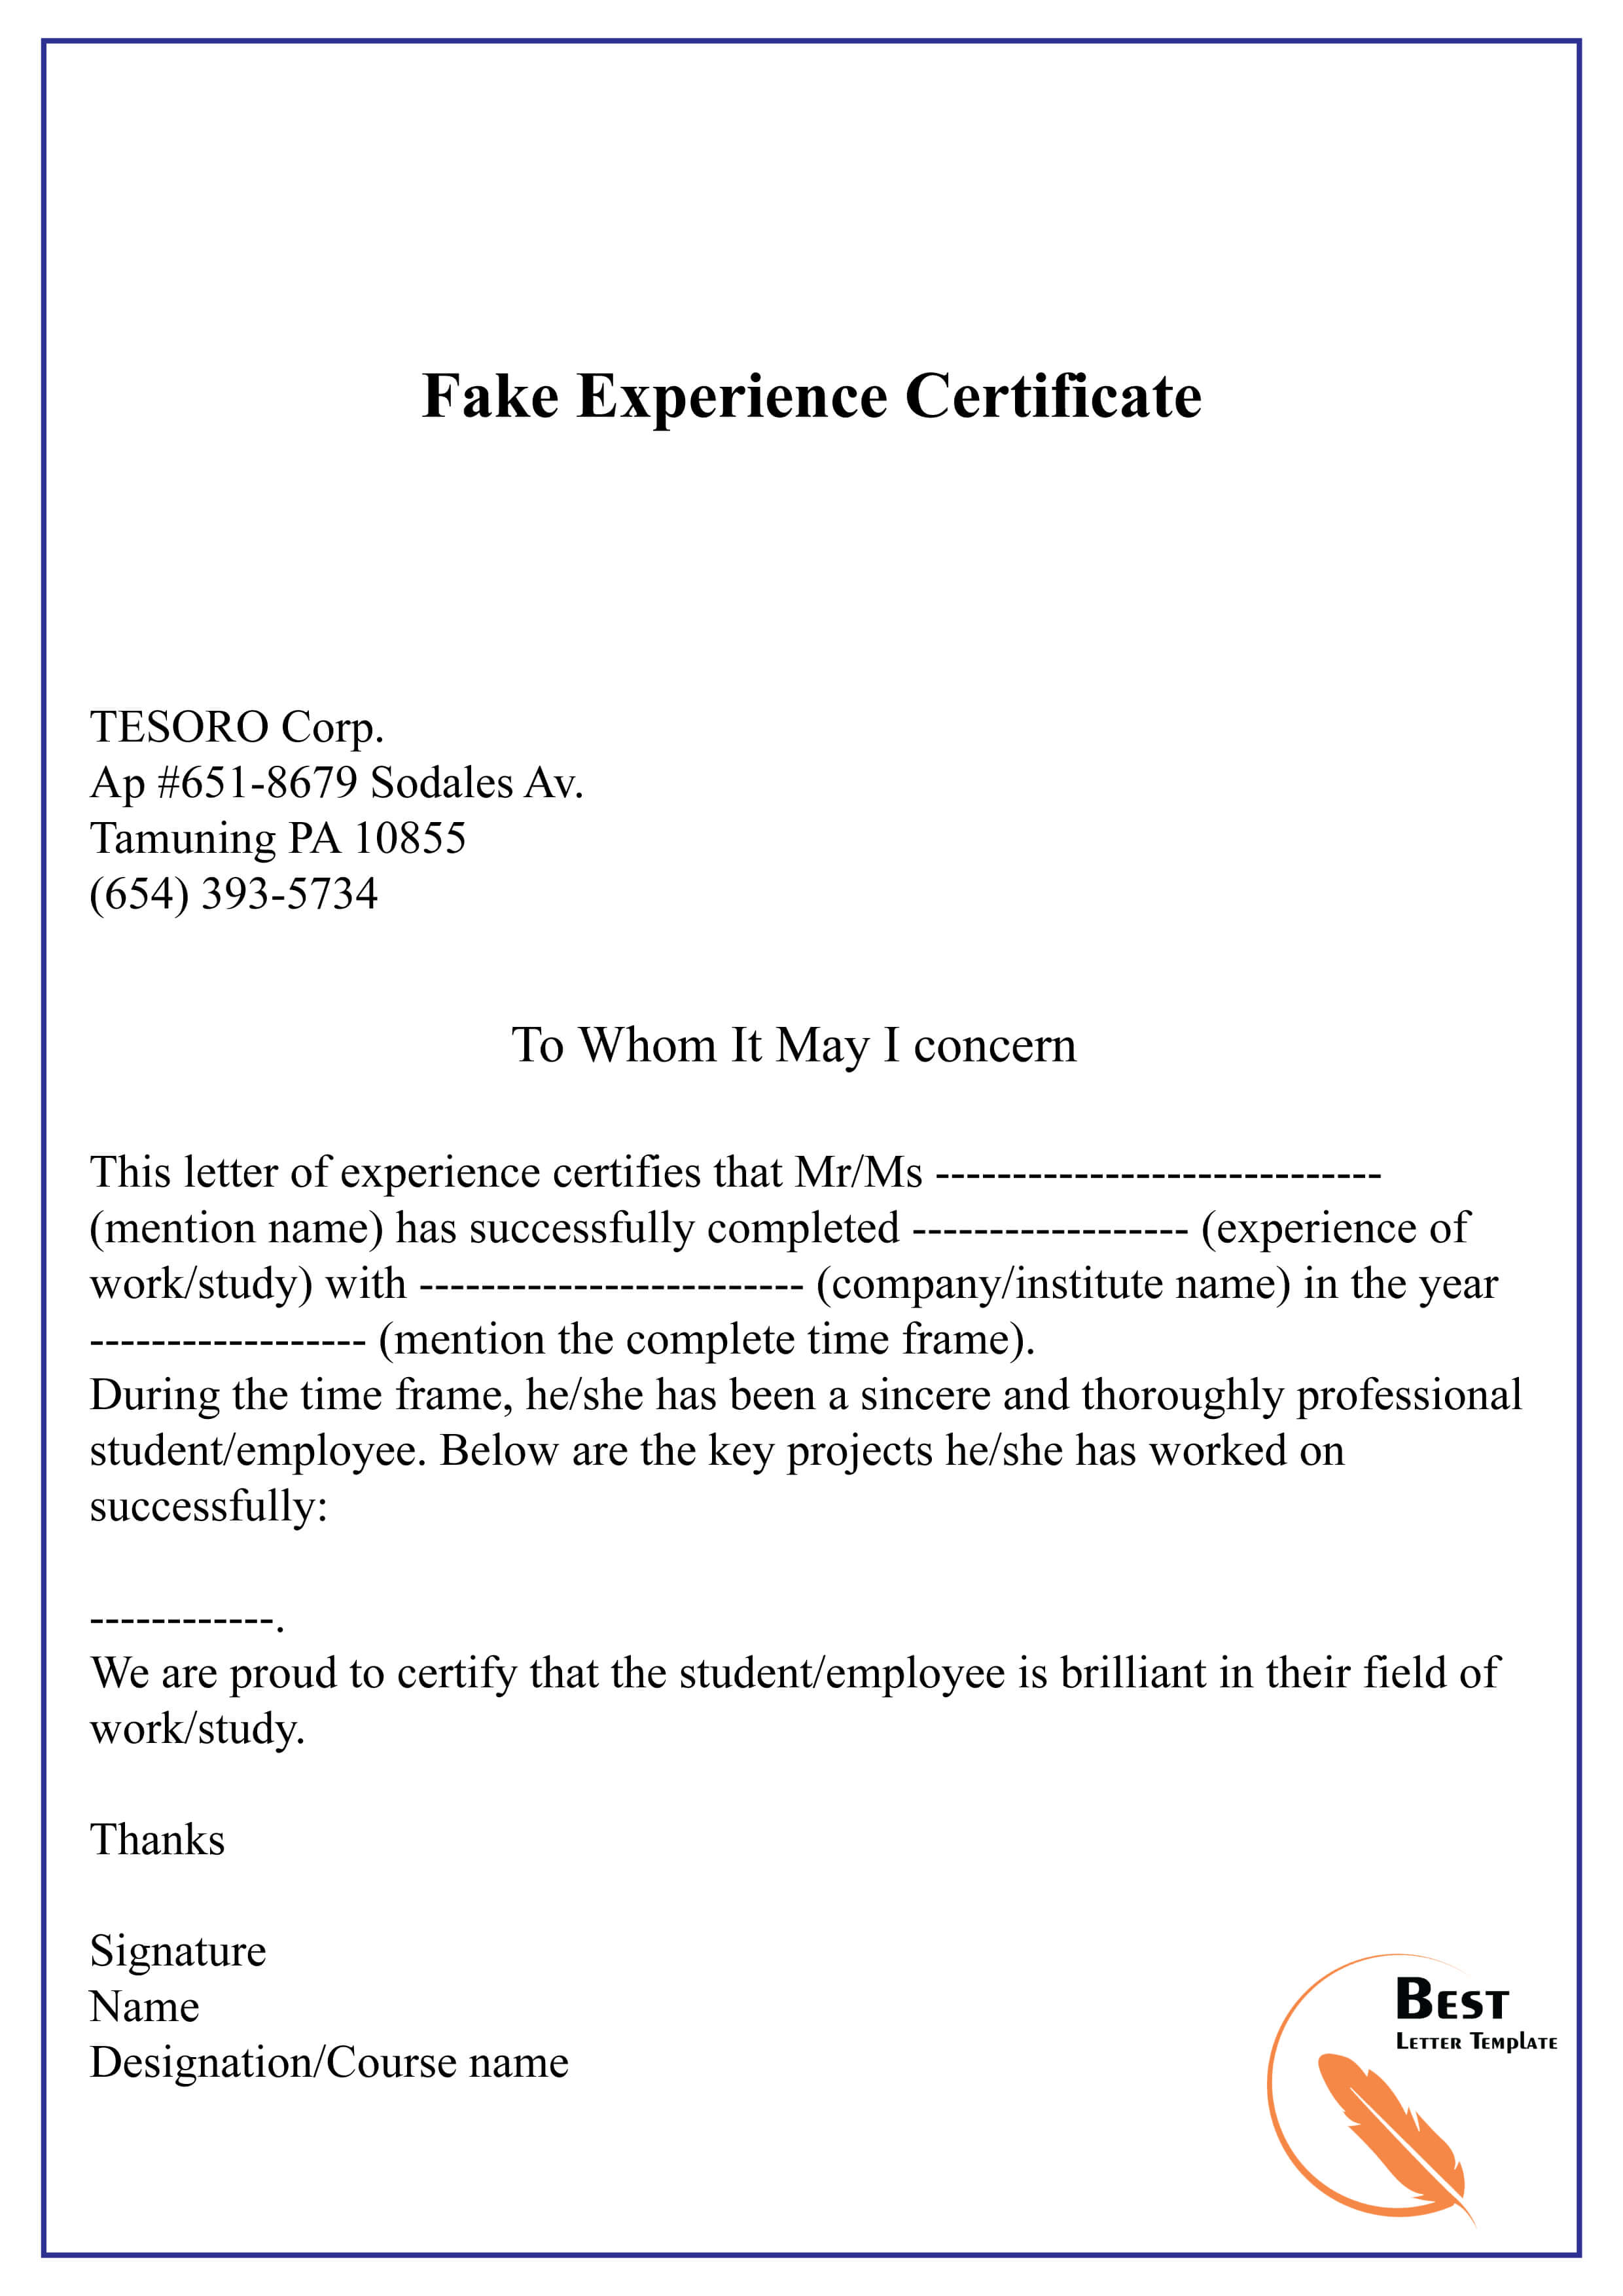 Fake Experience Certificate 01 | Best Letter Template Inside Certificate Of Experience Template